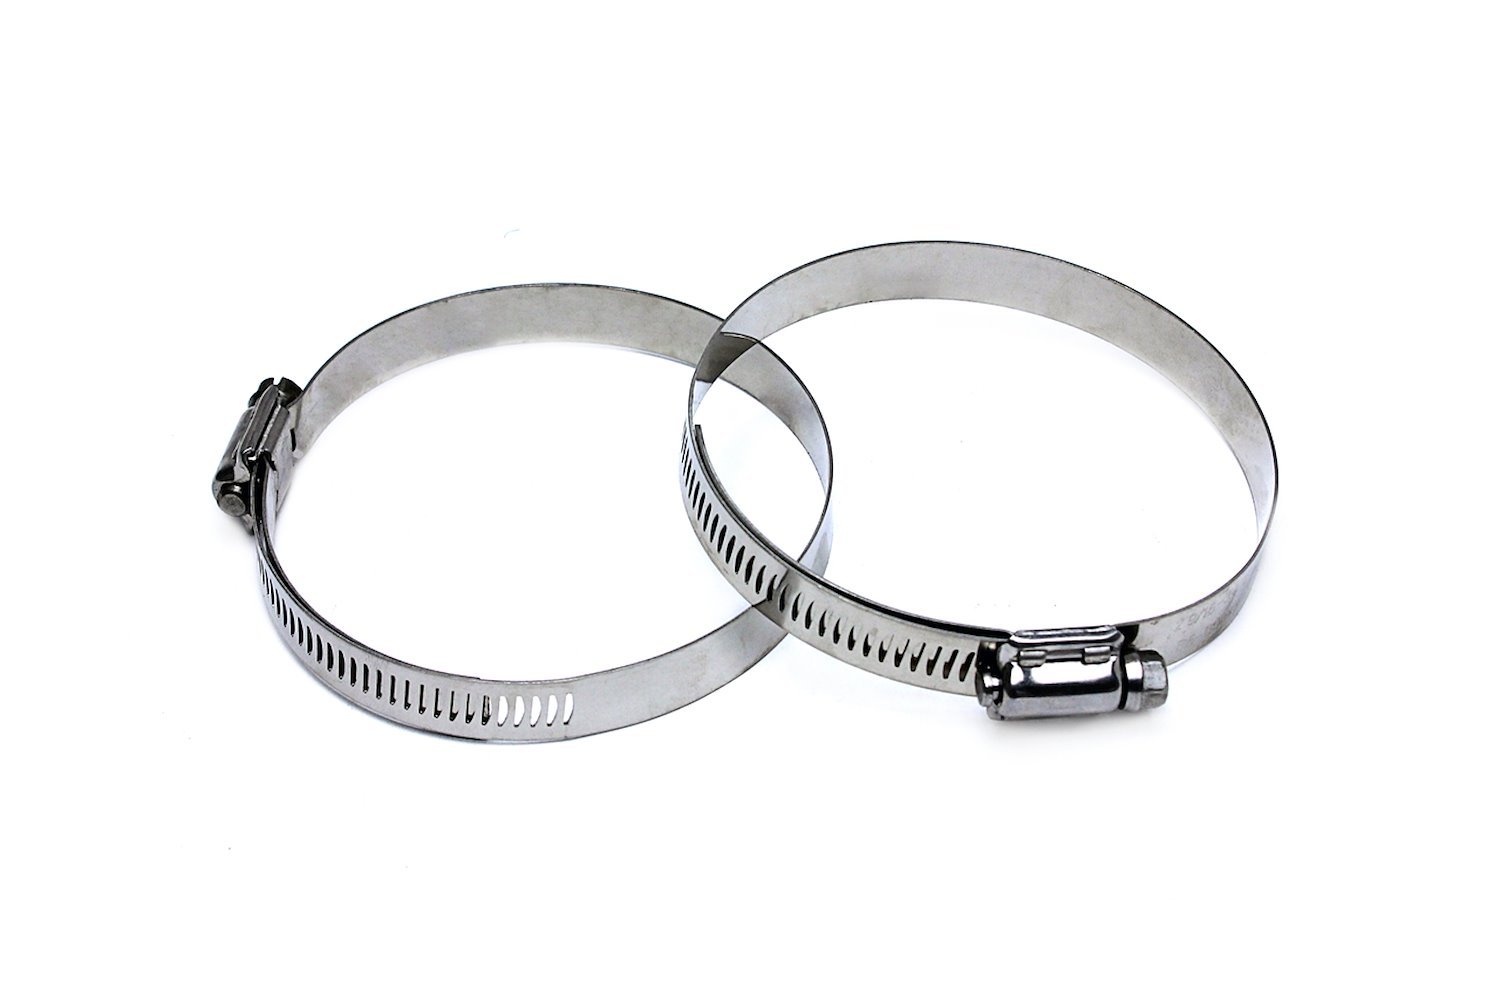 SSWC-117-140x2 Stainless Steel Worm Gear Hose Clamp, Effective Range: 4-5/8 in.- 5-1/2 in., 2Pc